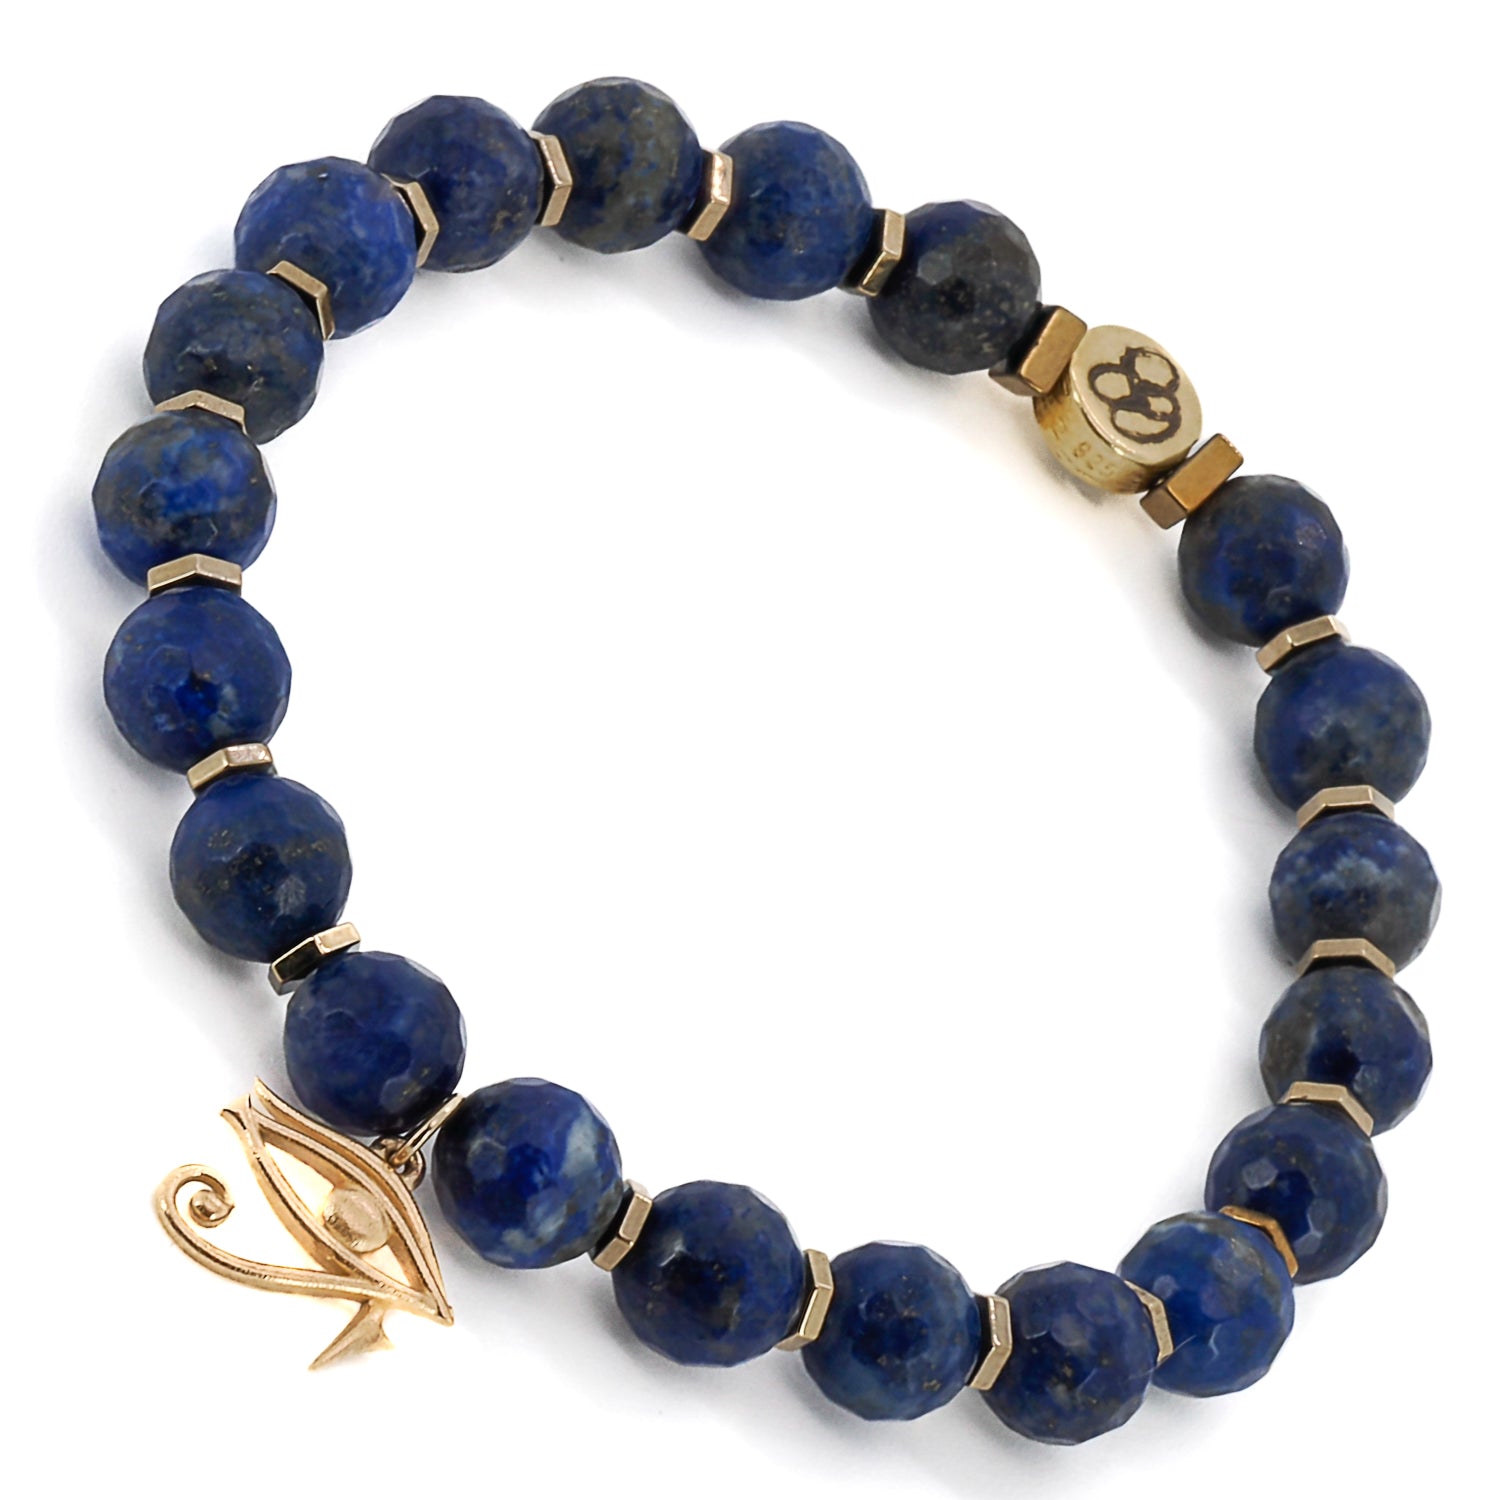 Embark on a journey of spirituality and style with the Solid Gold Eye of Ra Spiritual Beaded Bracelet, a handcrafted masterpiece featuring lapis lazuli stones and a solid gold charm.